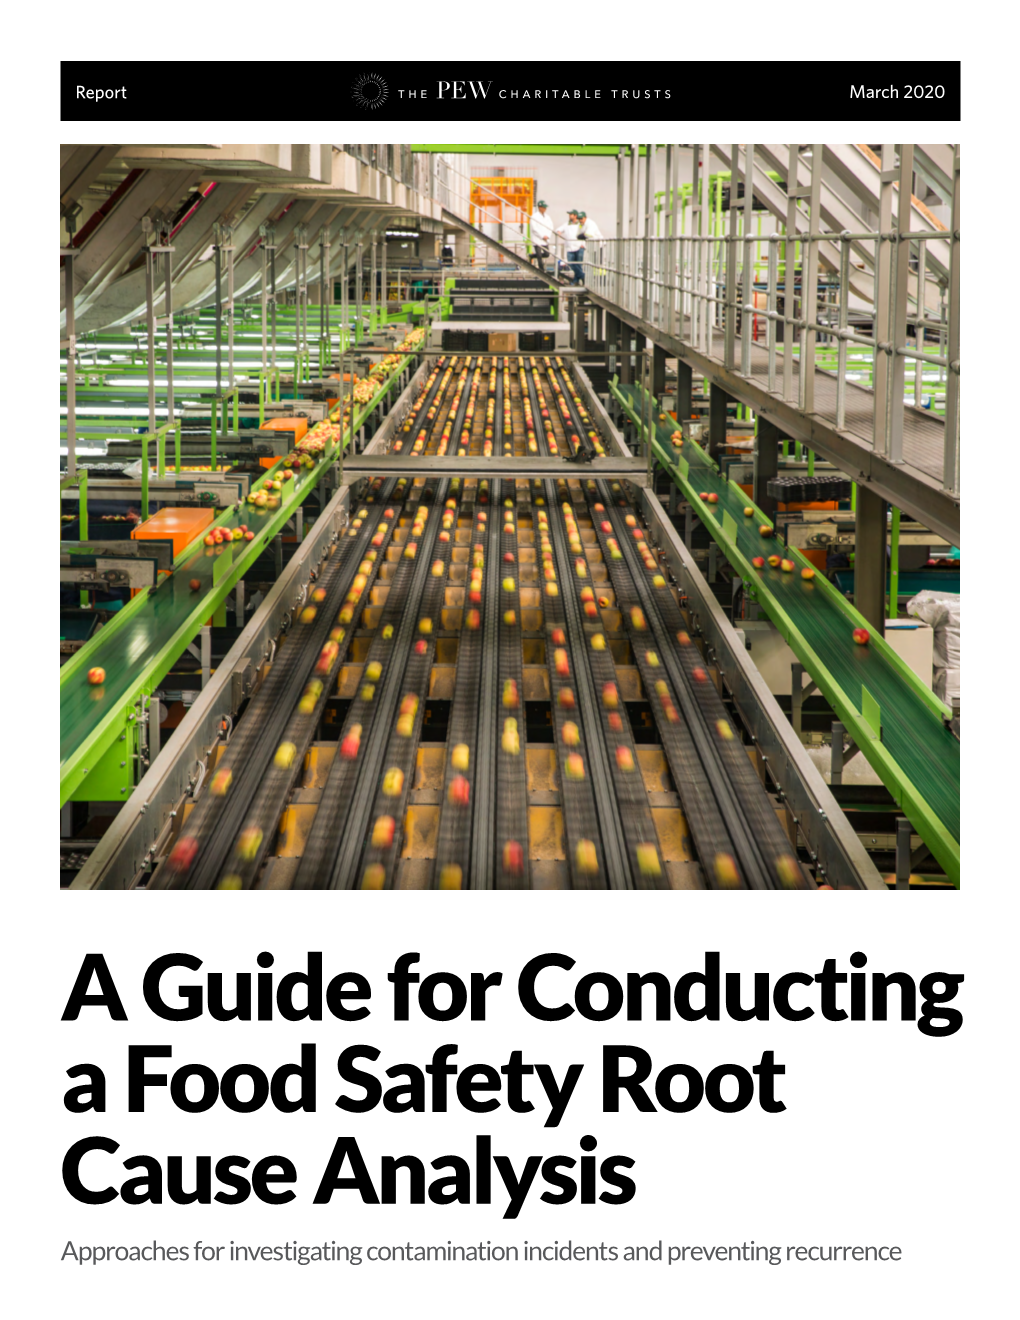 A Guide for Conducting a Food Safety Root Cause Analysis Approaches for Investigating Contamination Incidents and Preventing Recurrence Contents